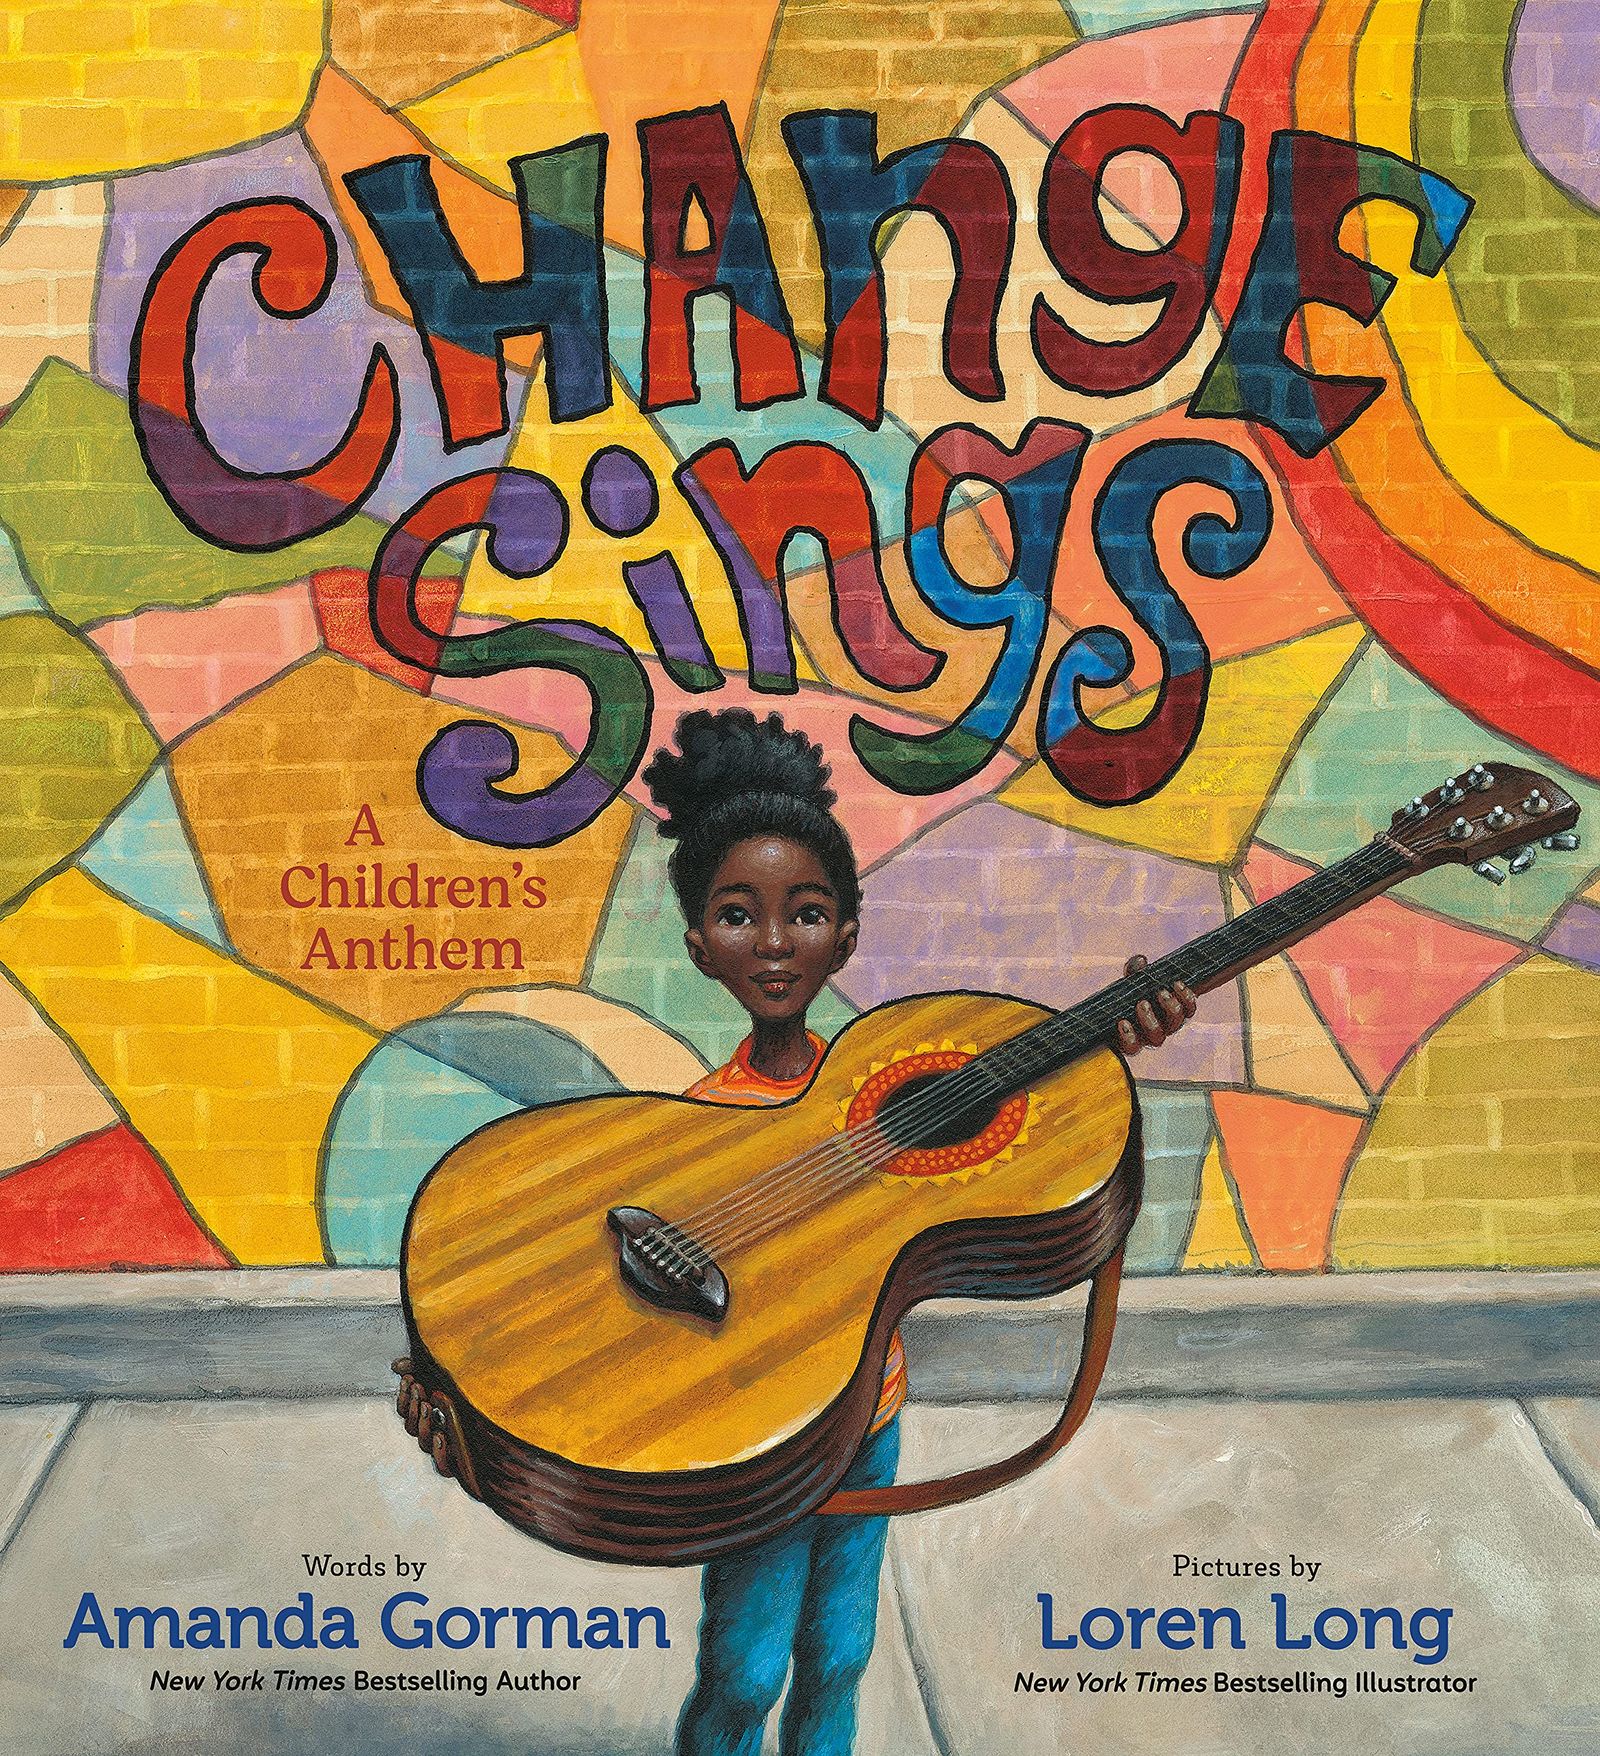 "Change Sings", new children's book from Amanda Gorman, out today